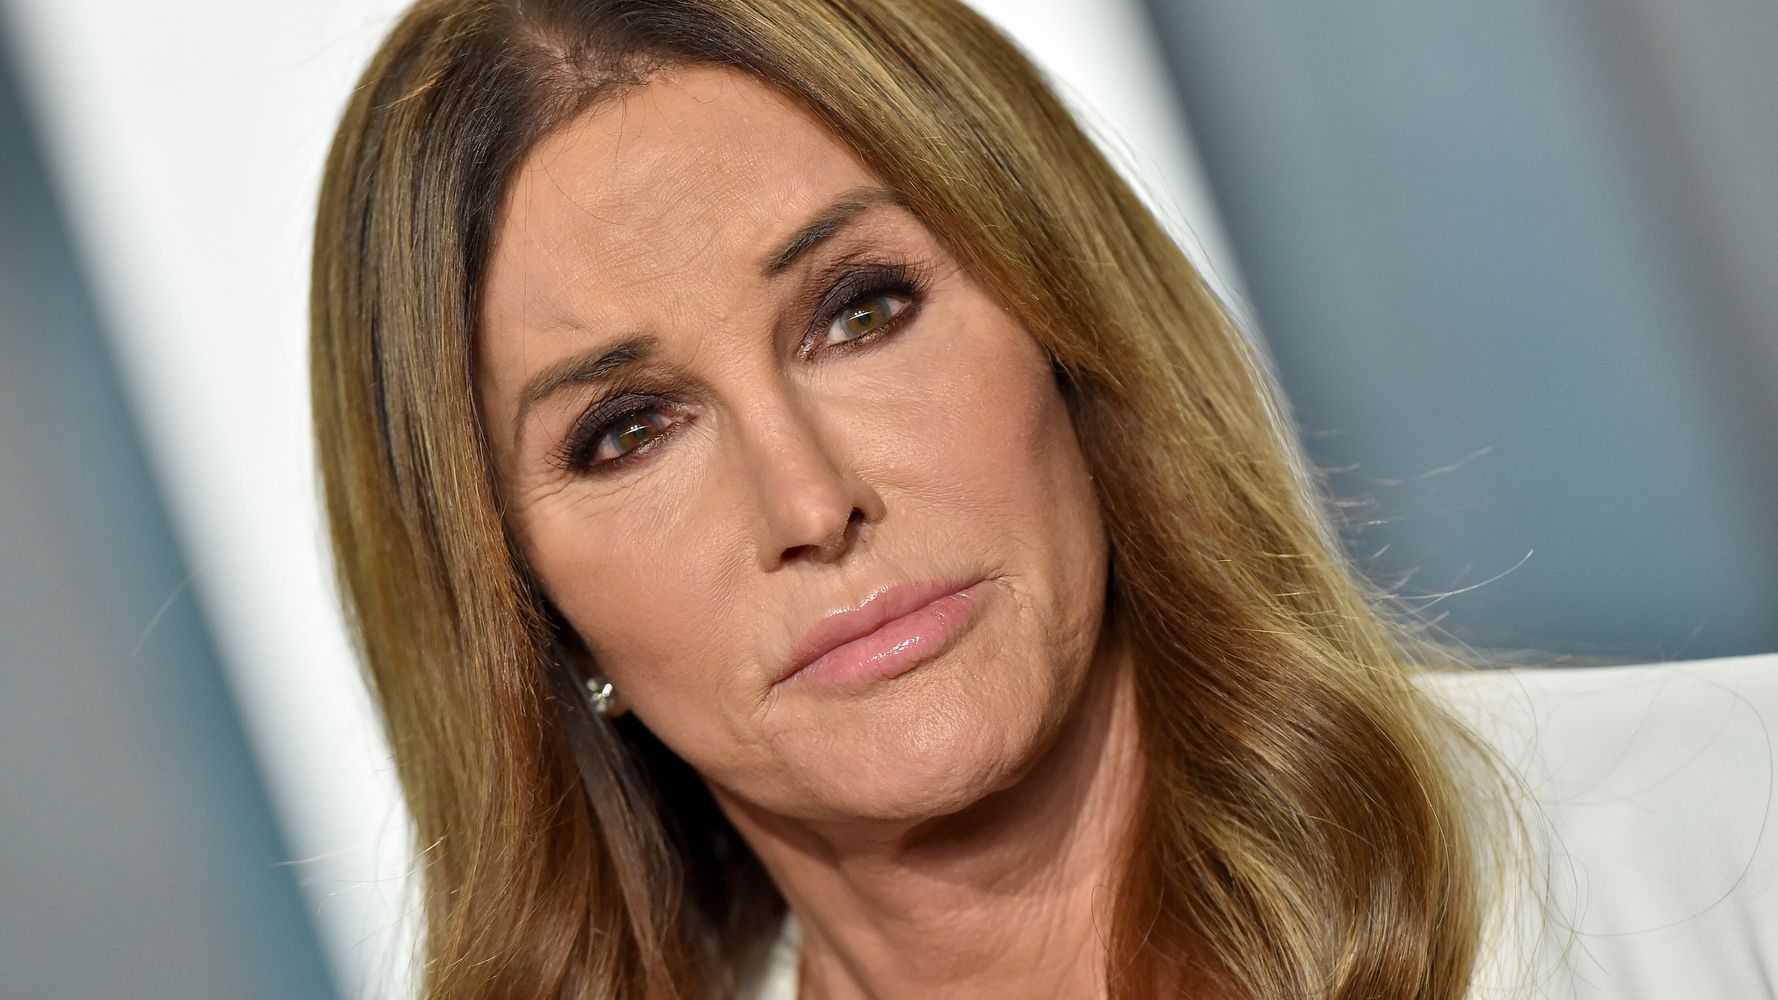 Caitlyn Jenner Is Running For California Governor